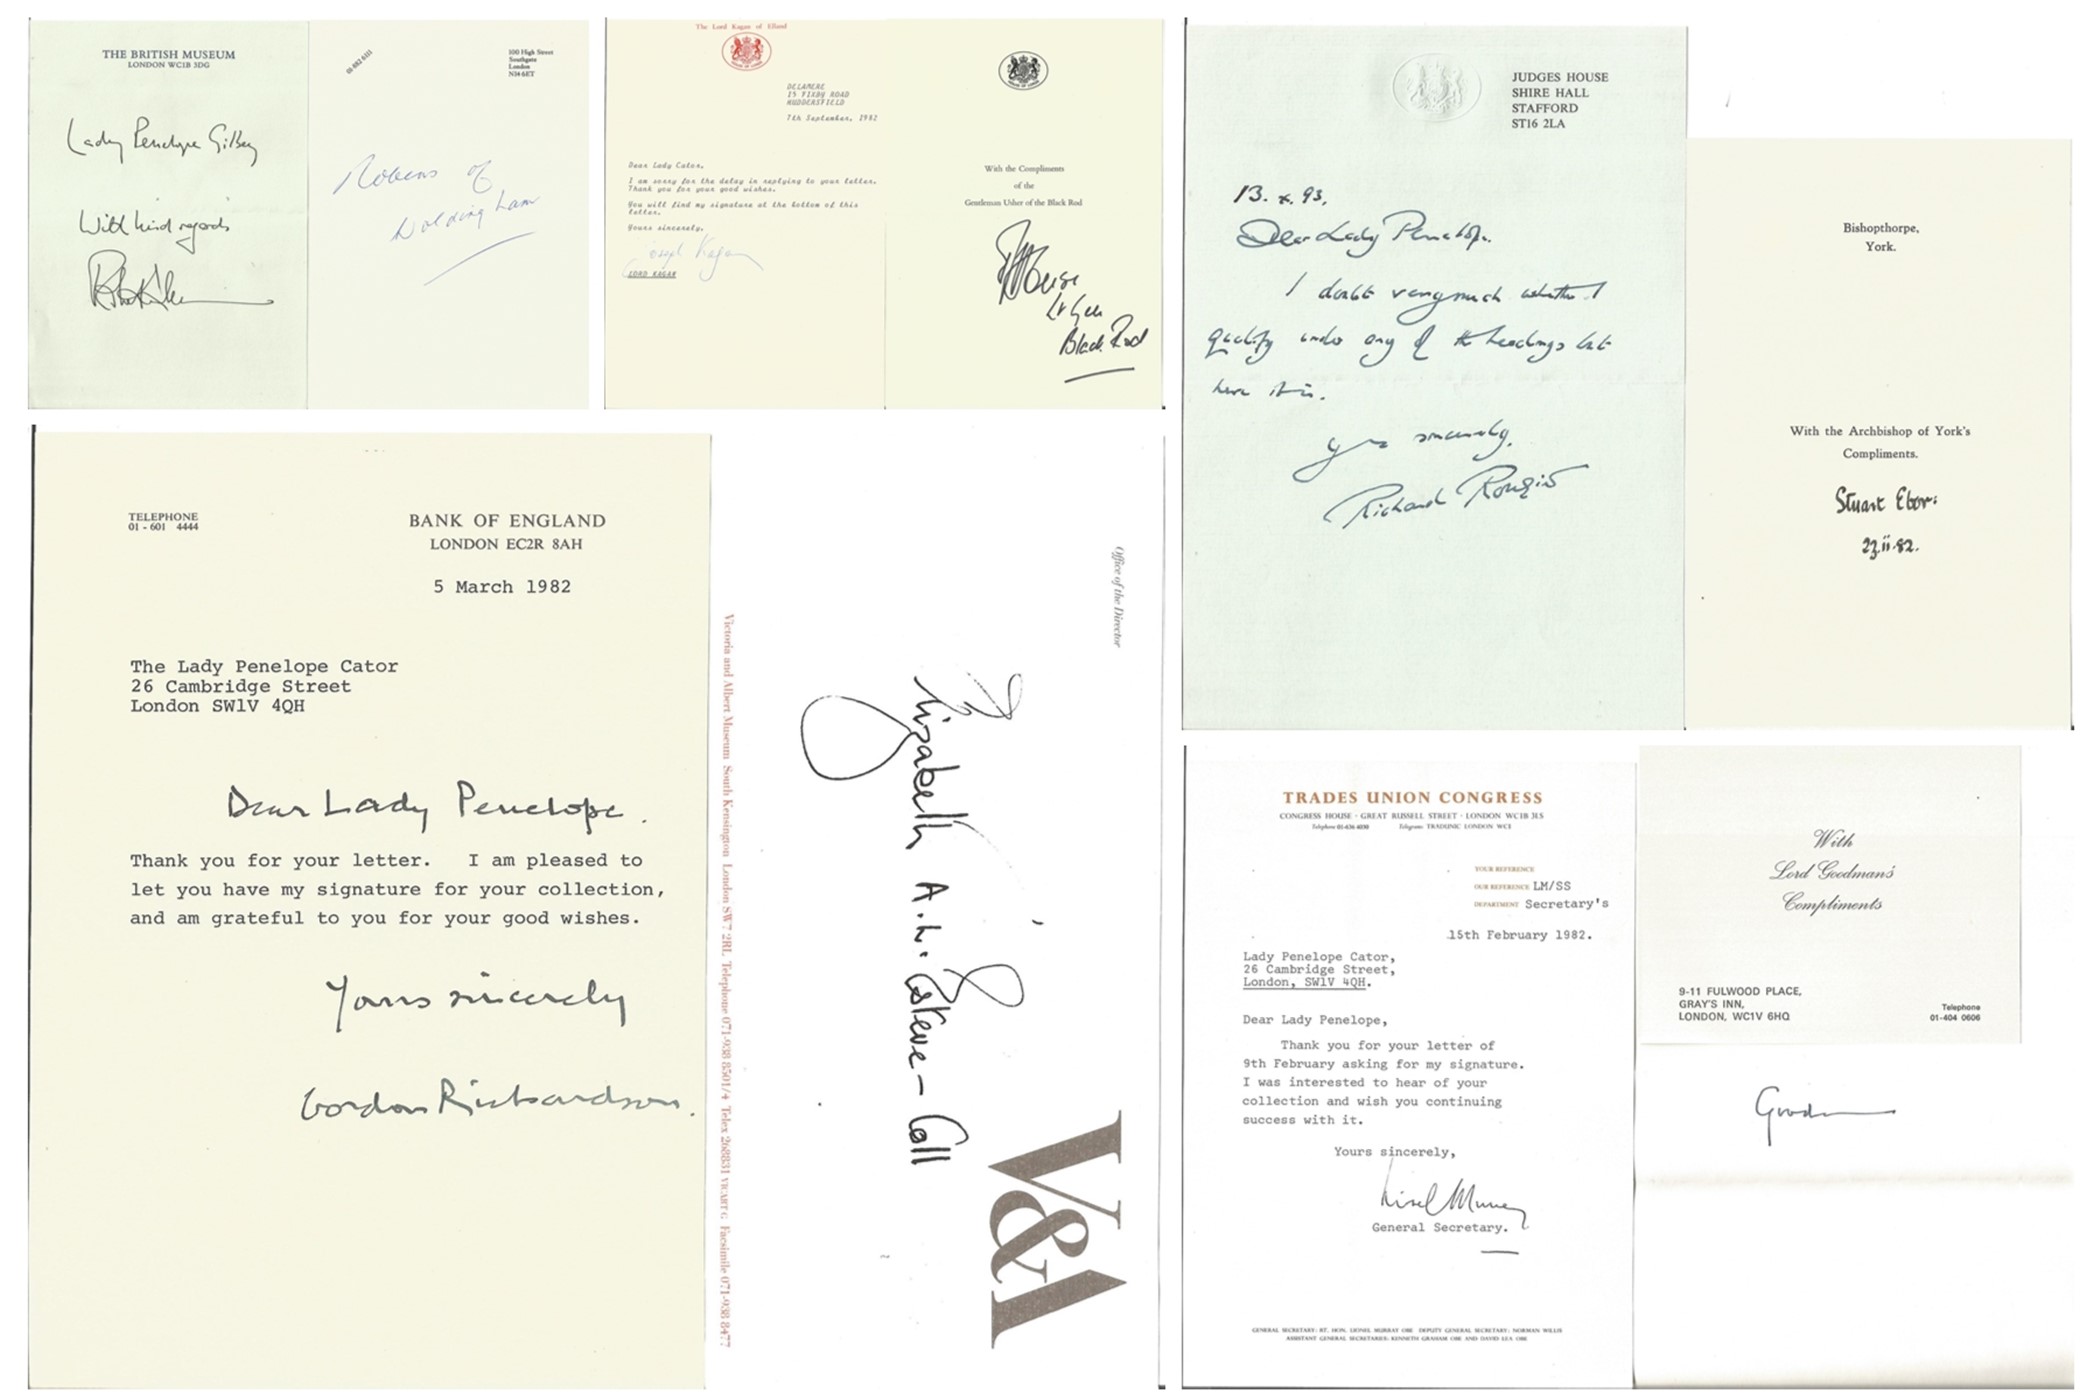 Political and military miscellaneous collection of signed compliments slips and letters.